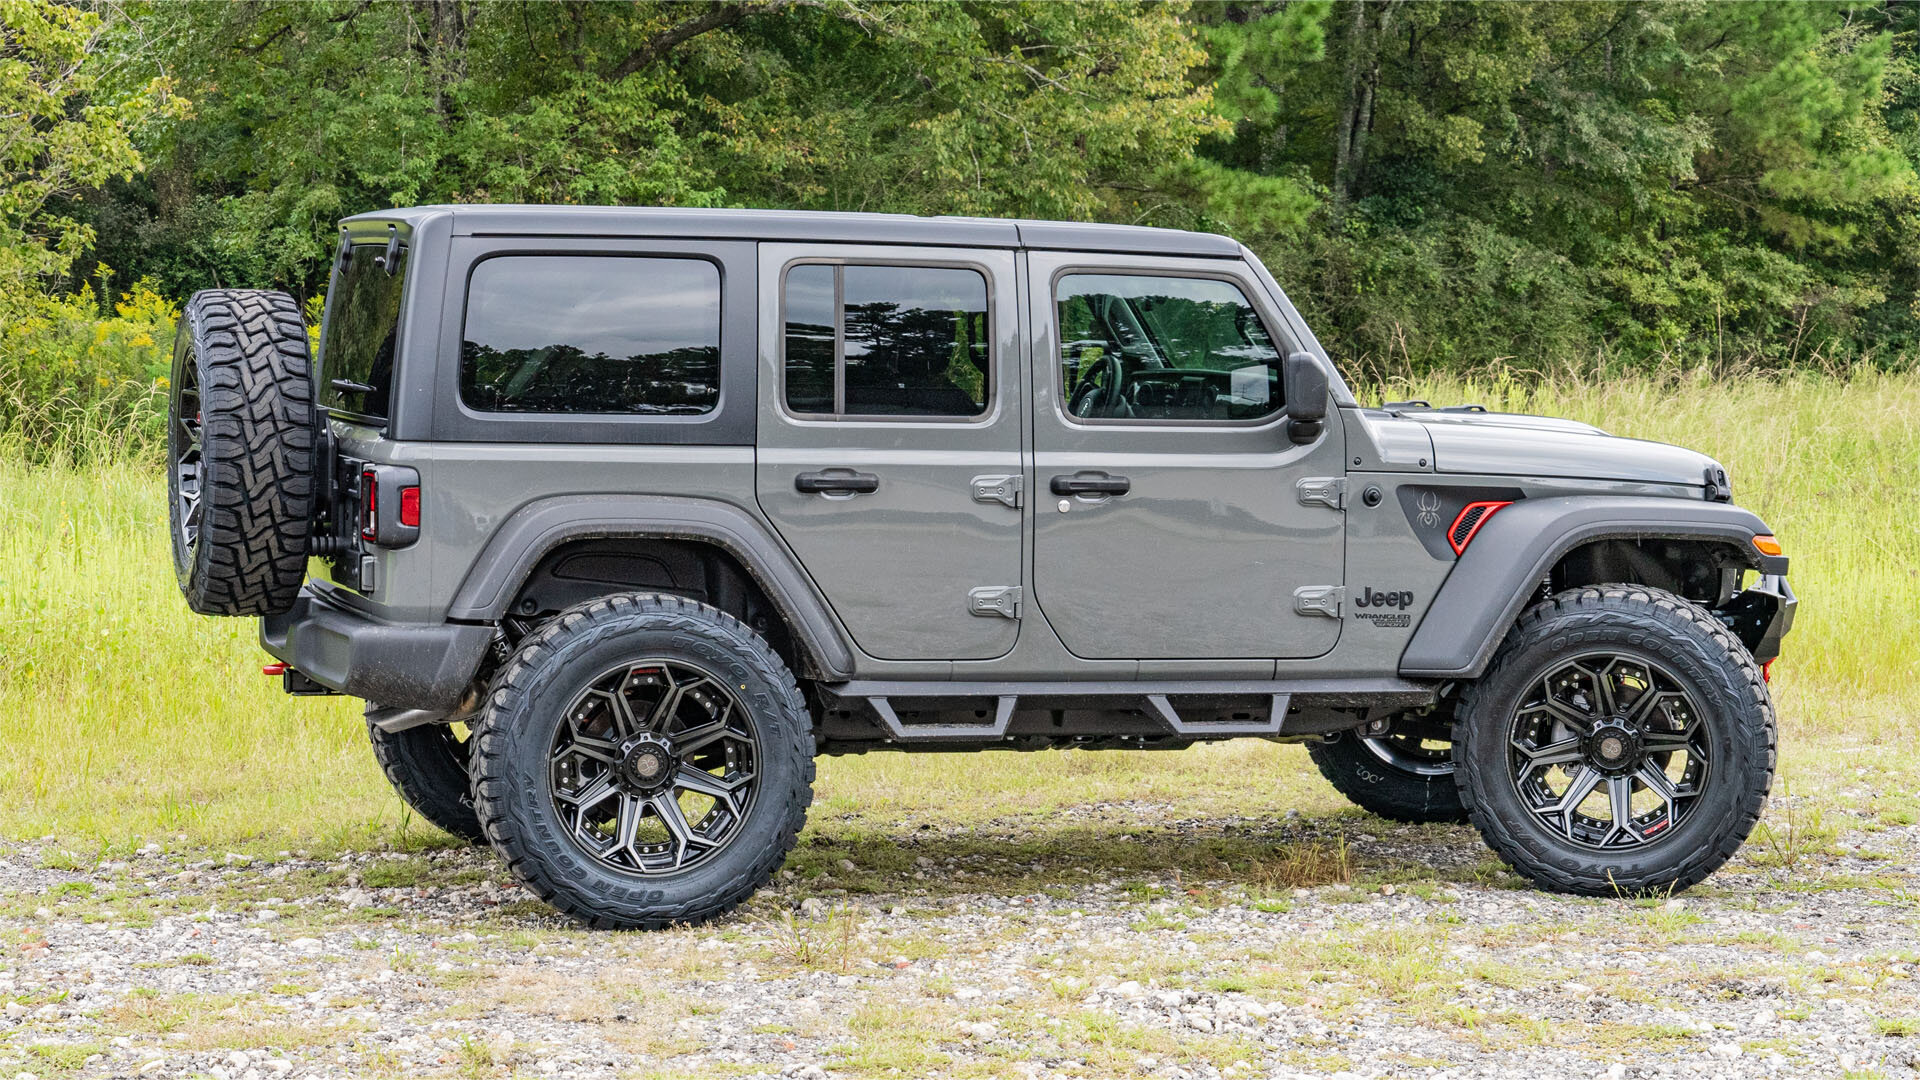 2023 Black Widow Jeep Wrangler shows off at the club, campground Autoblog